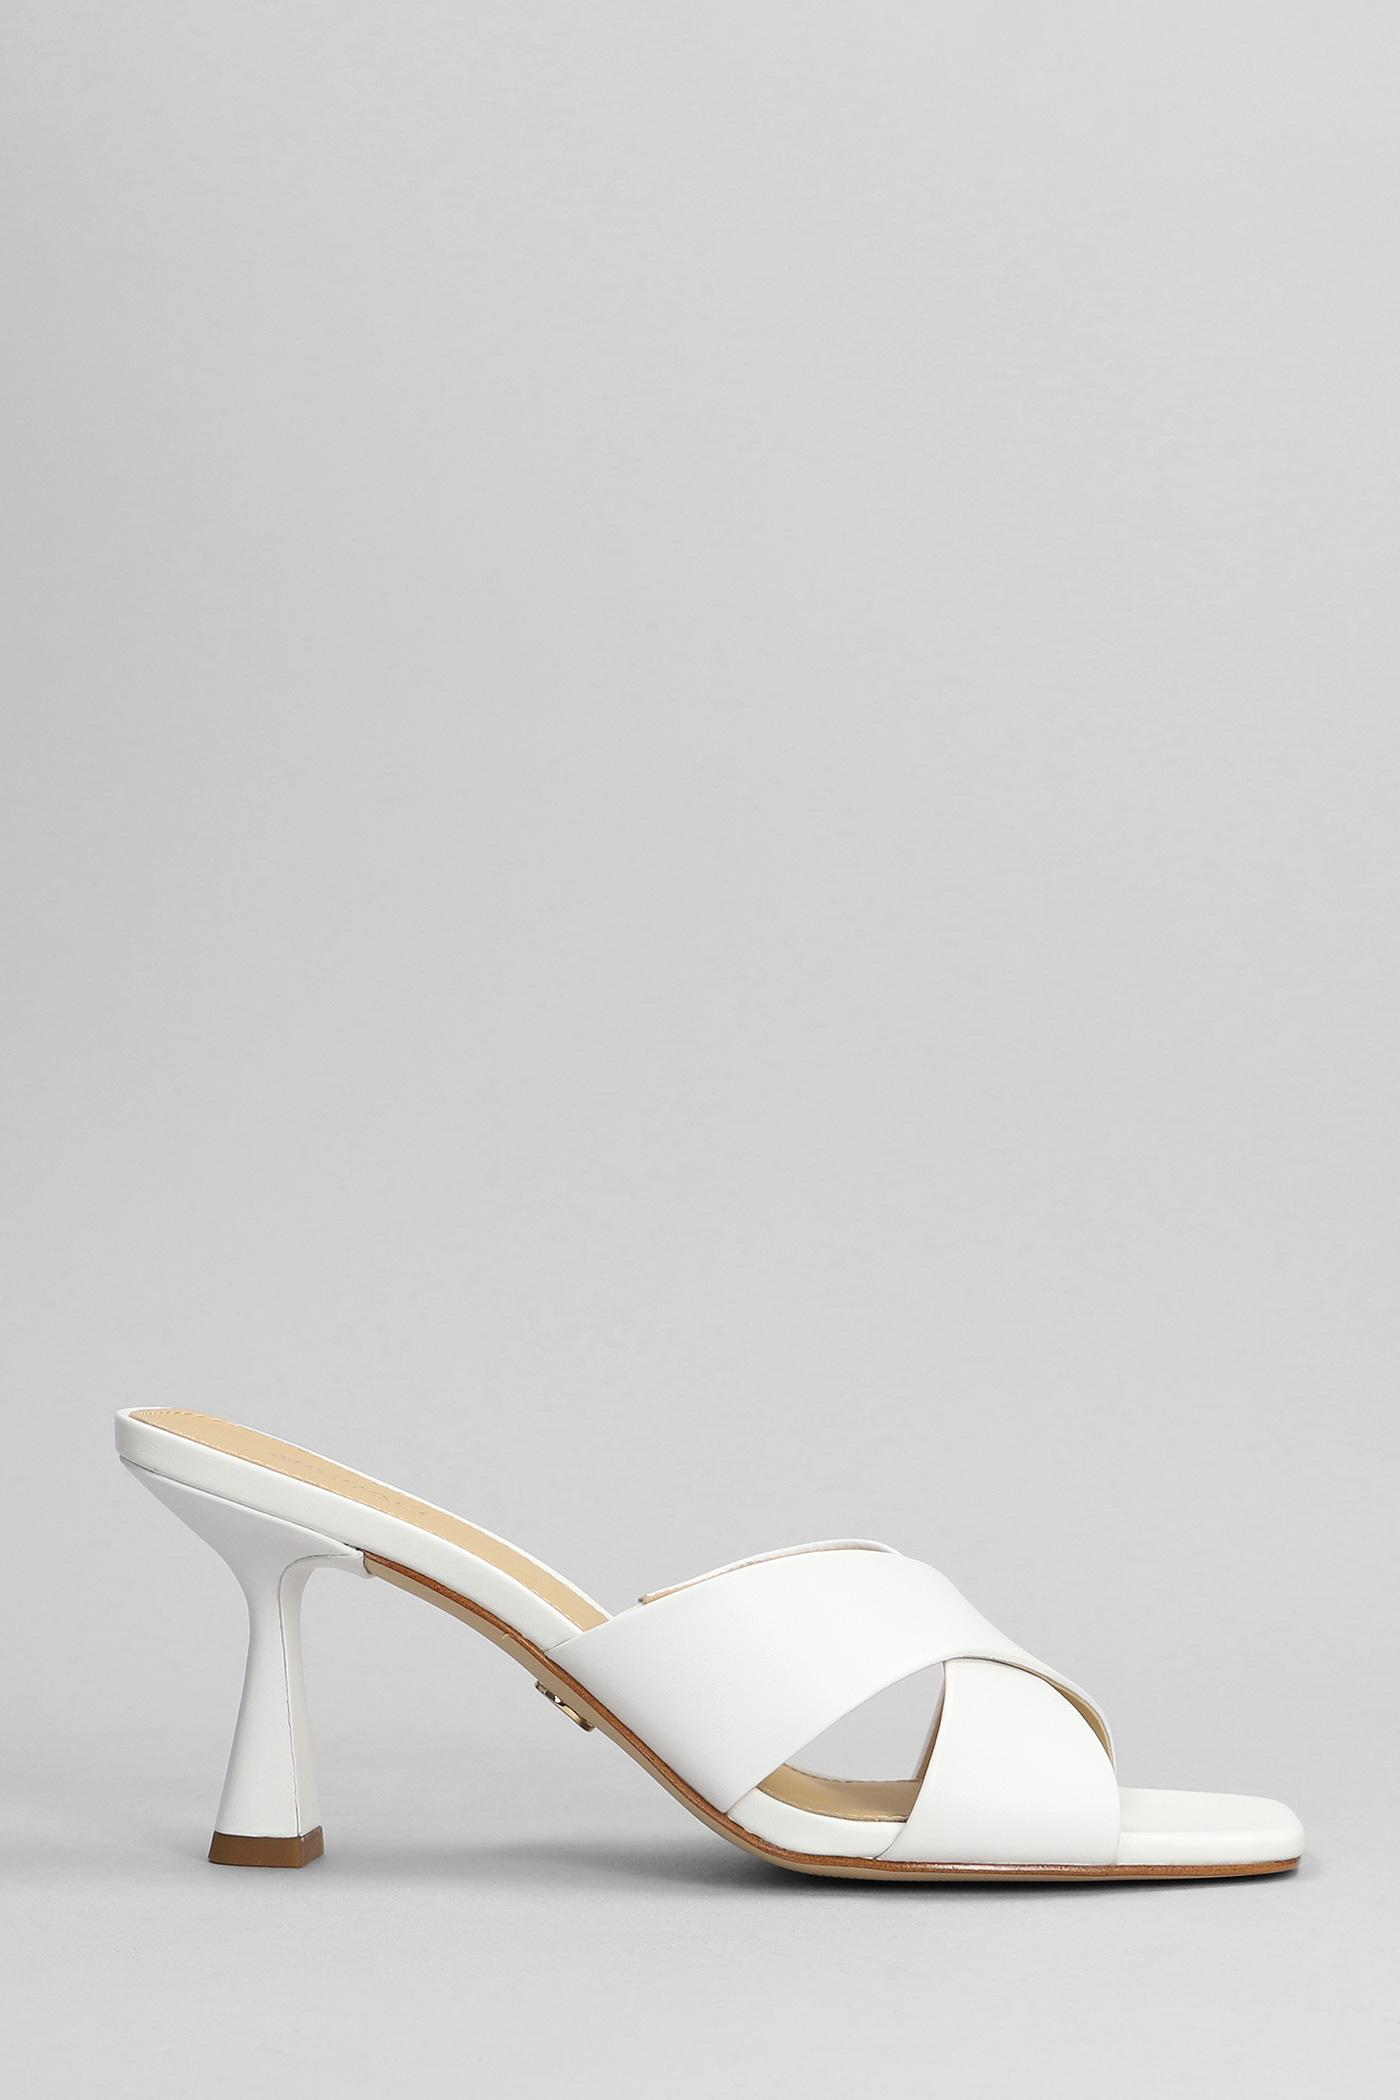 Michael Kors Clara Mule Sandals In White Leather | Lyst